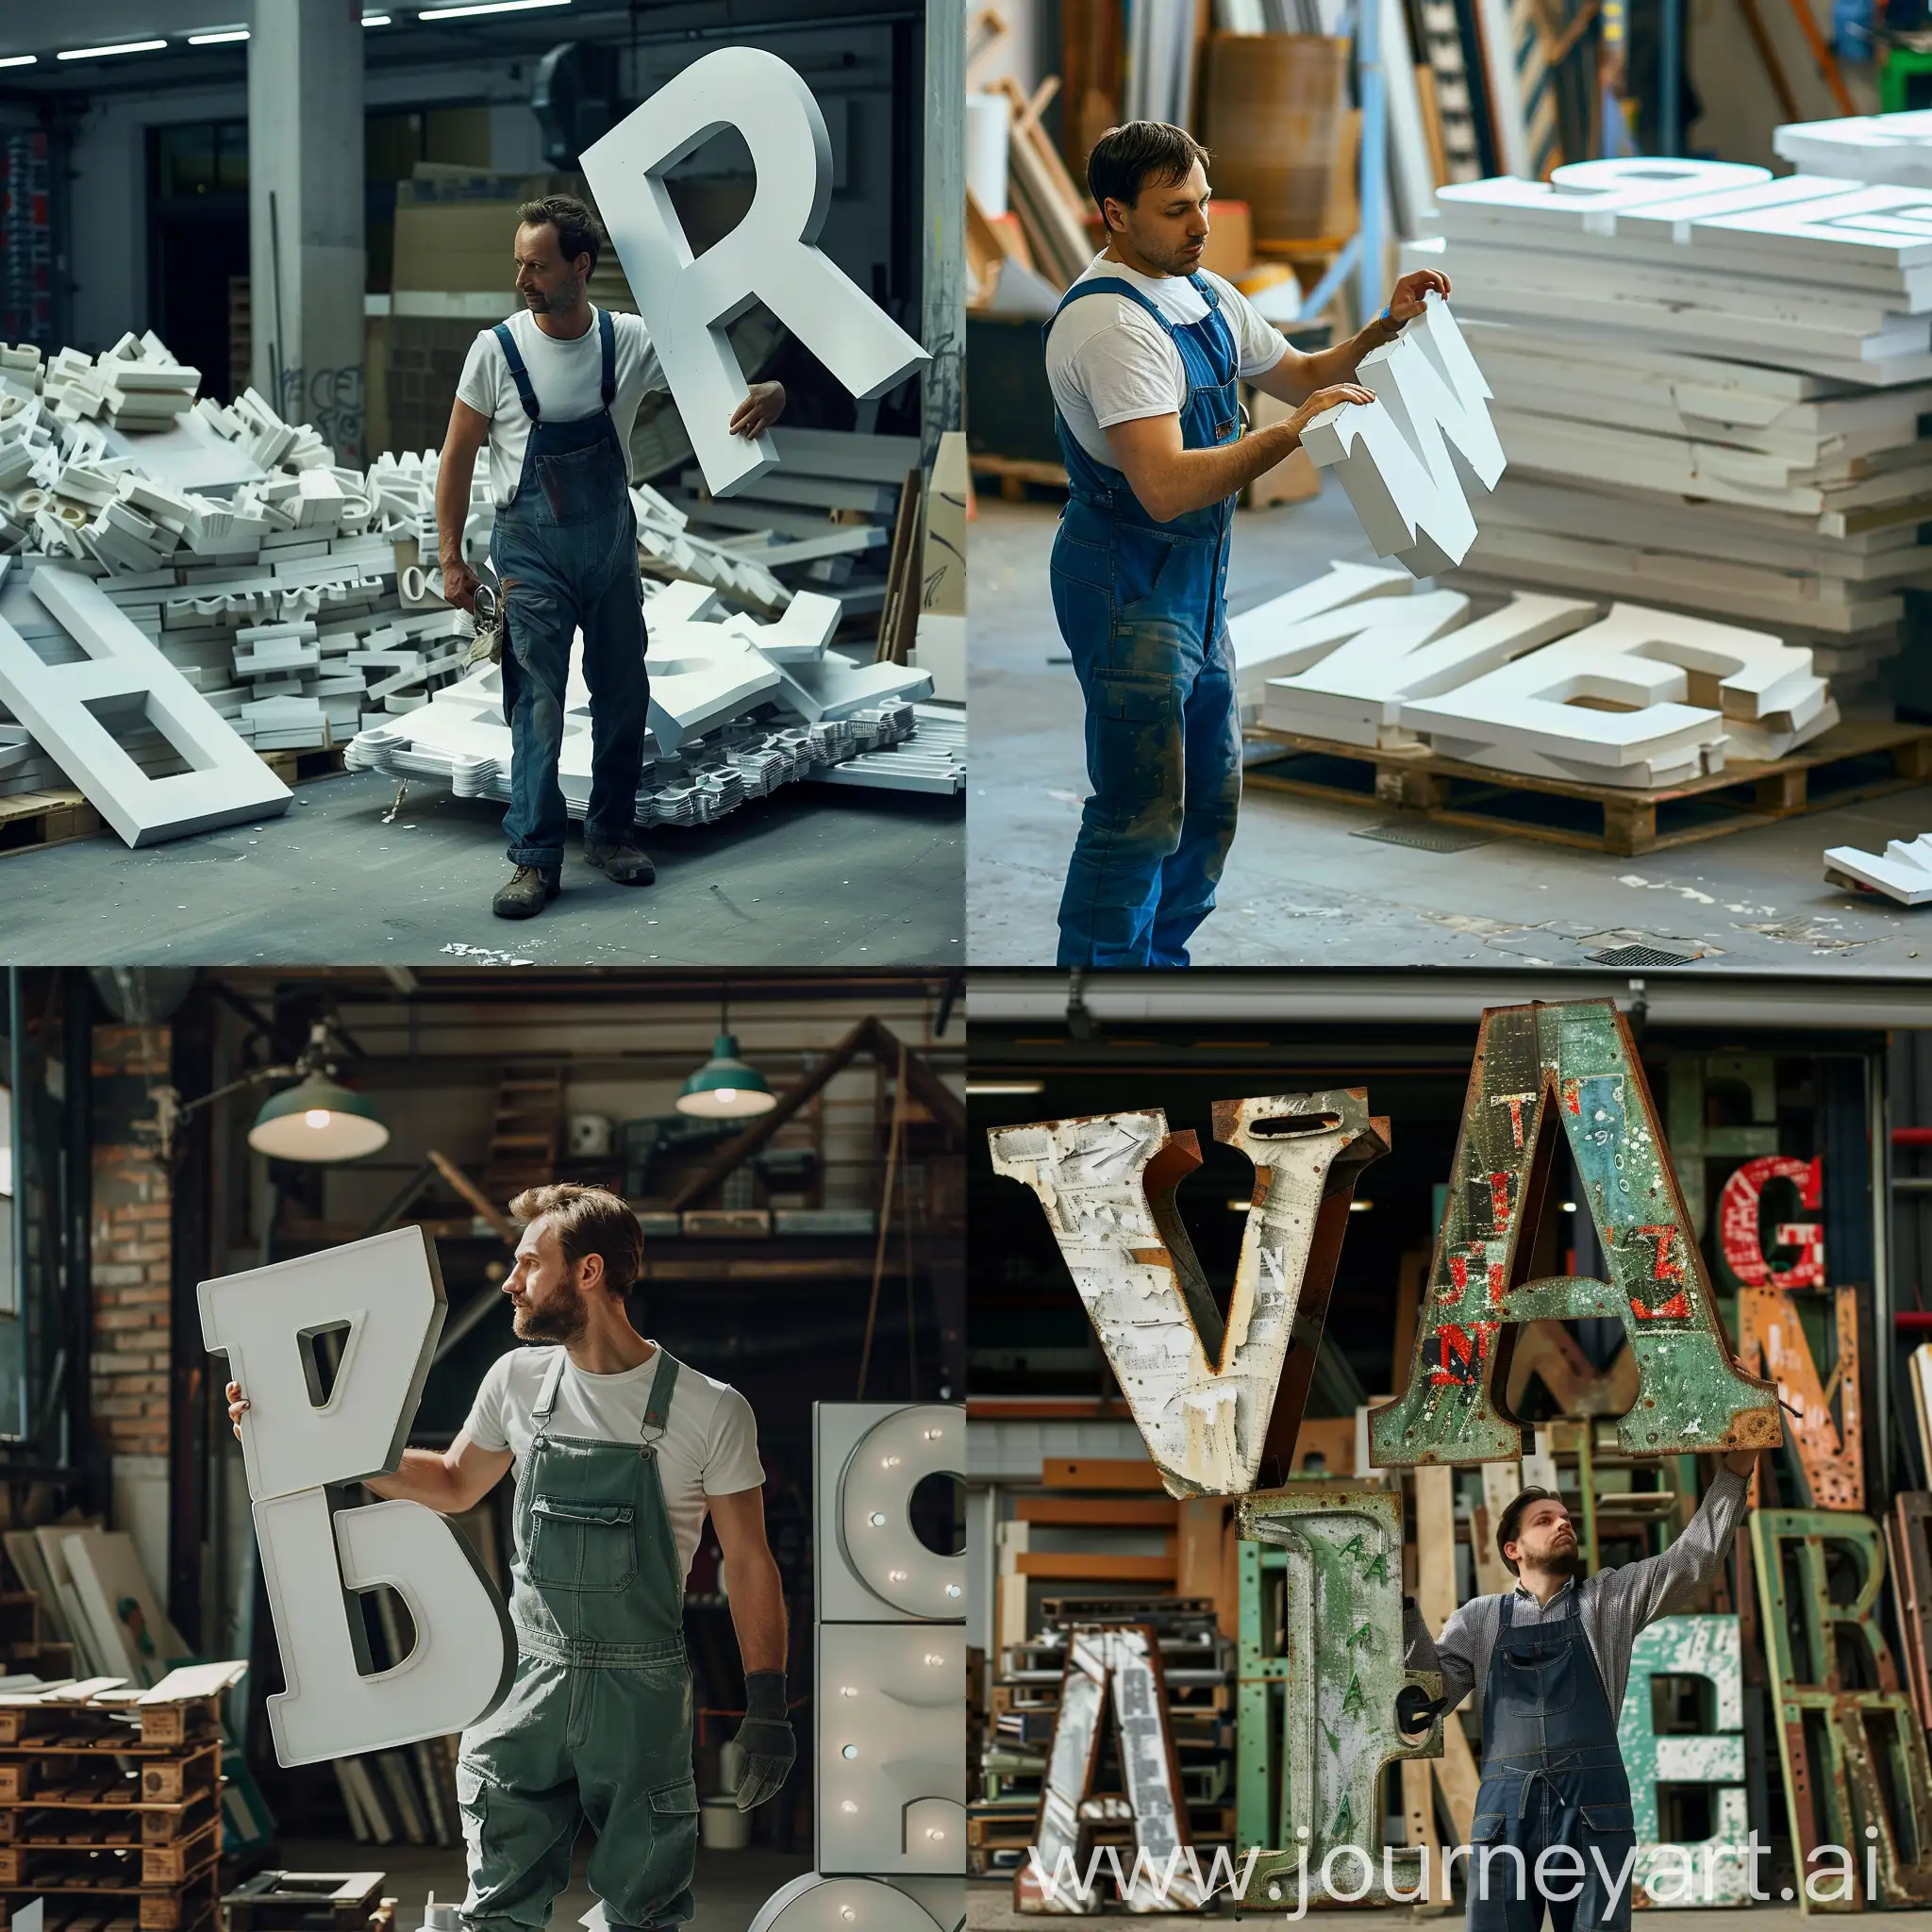 a worker in overalls collects large letters for advertising